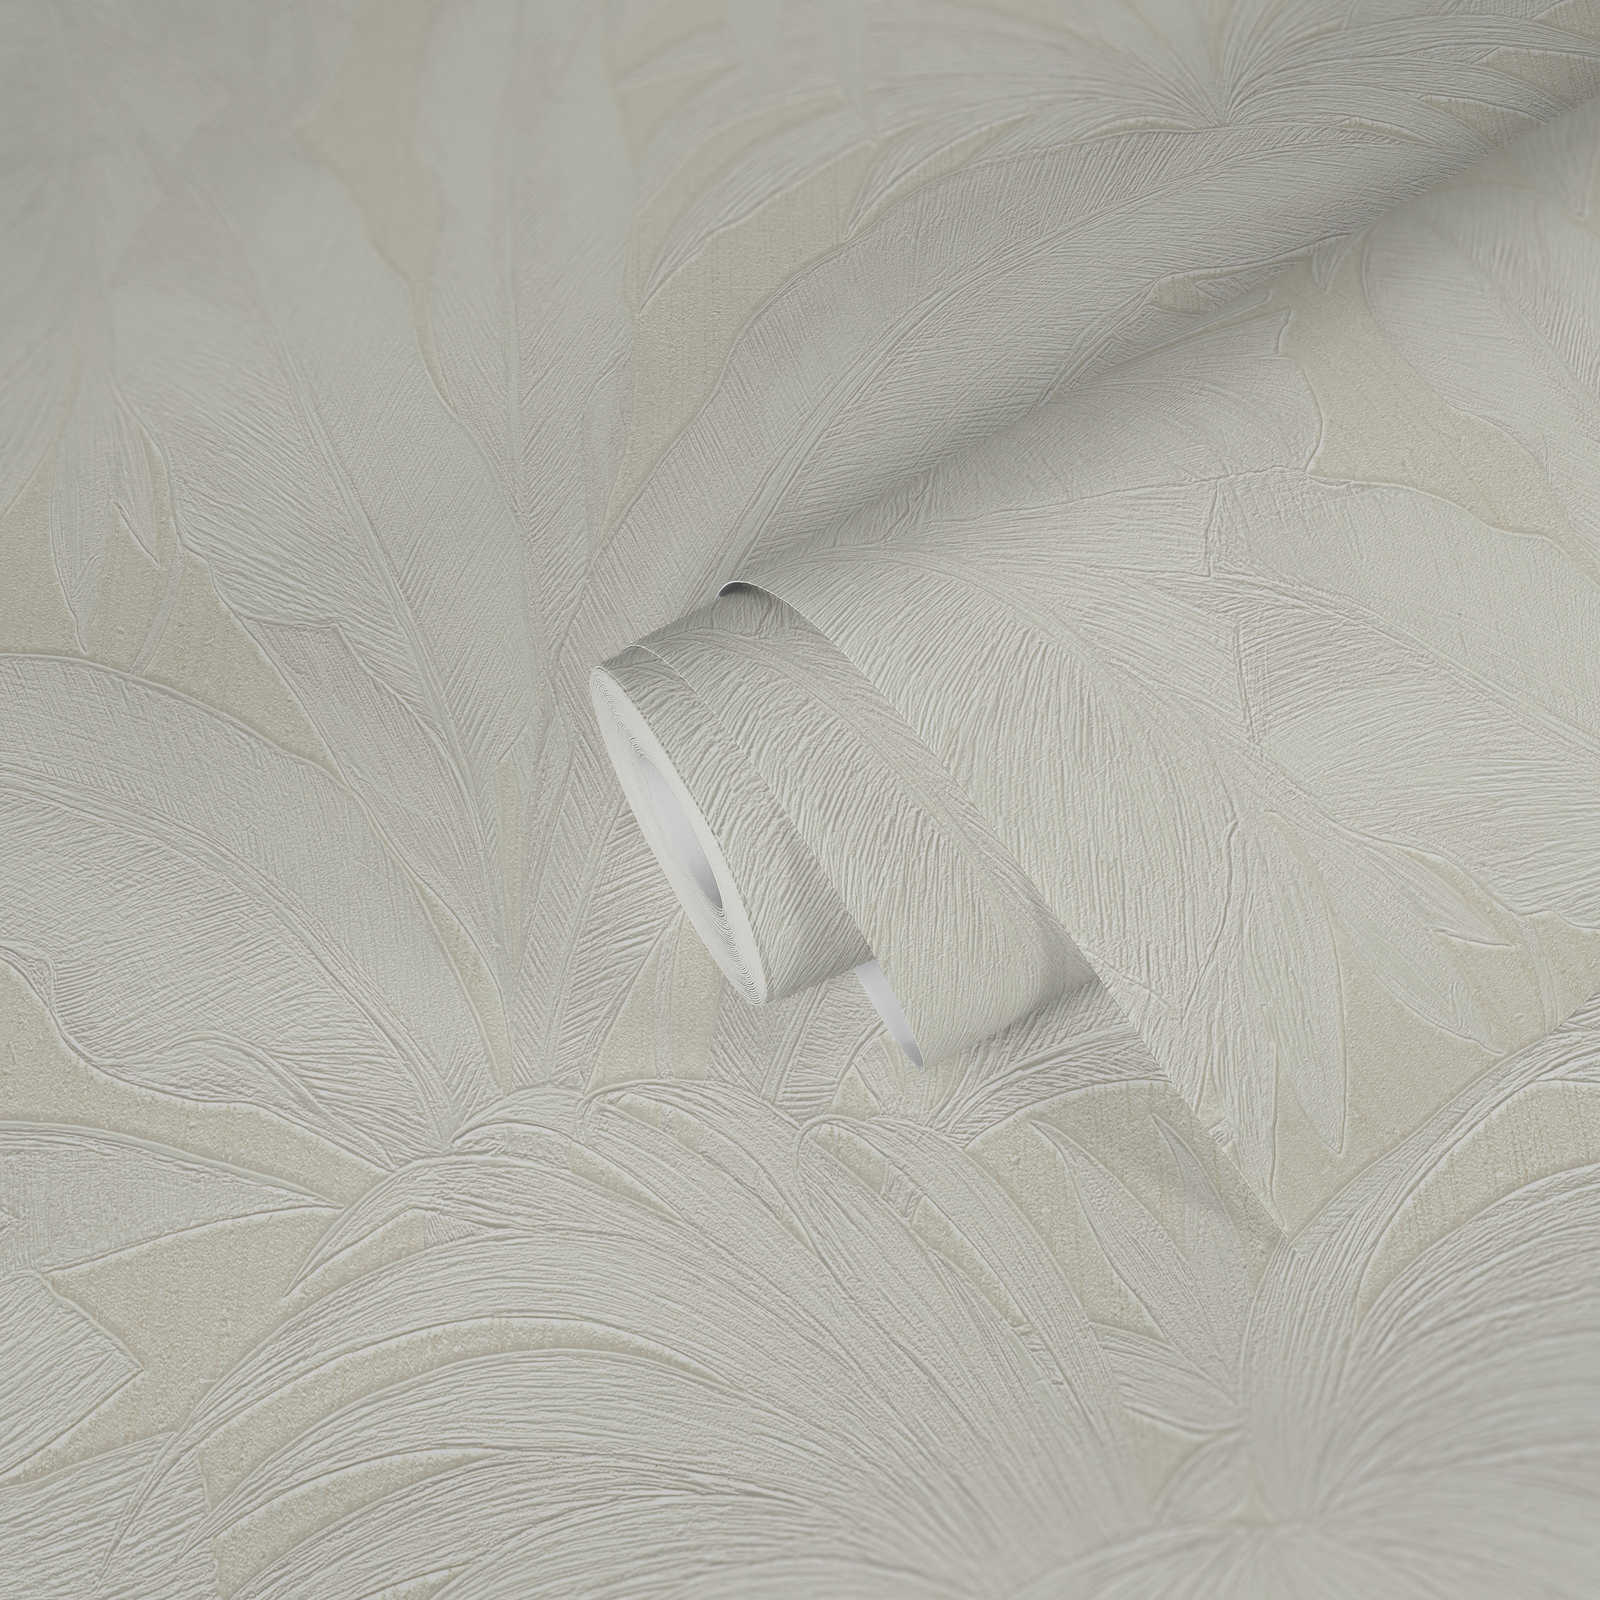             VERSACE wallpaper with palm leaves - cream, metallic
        